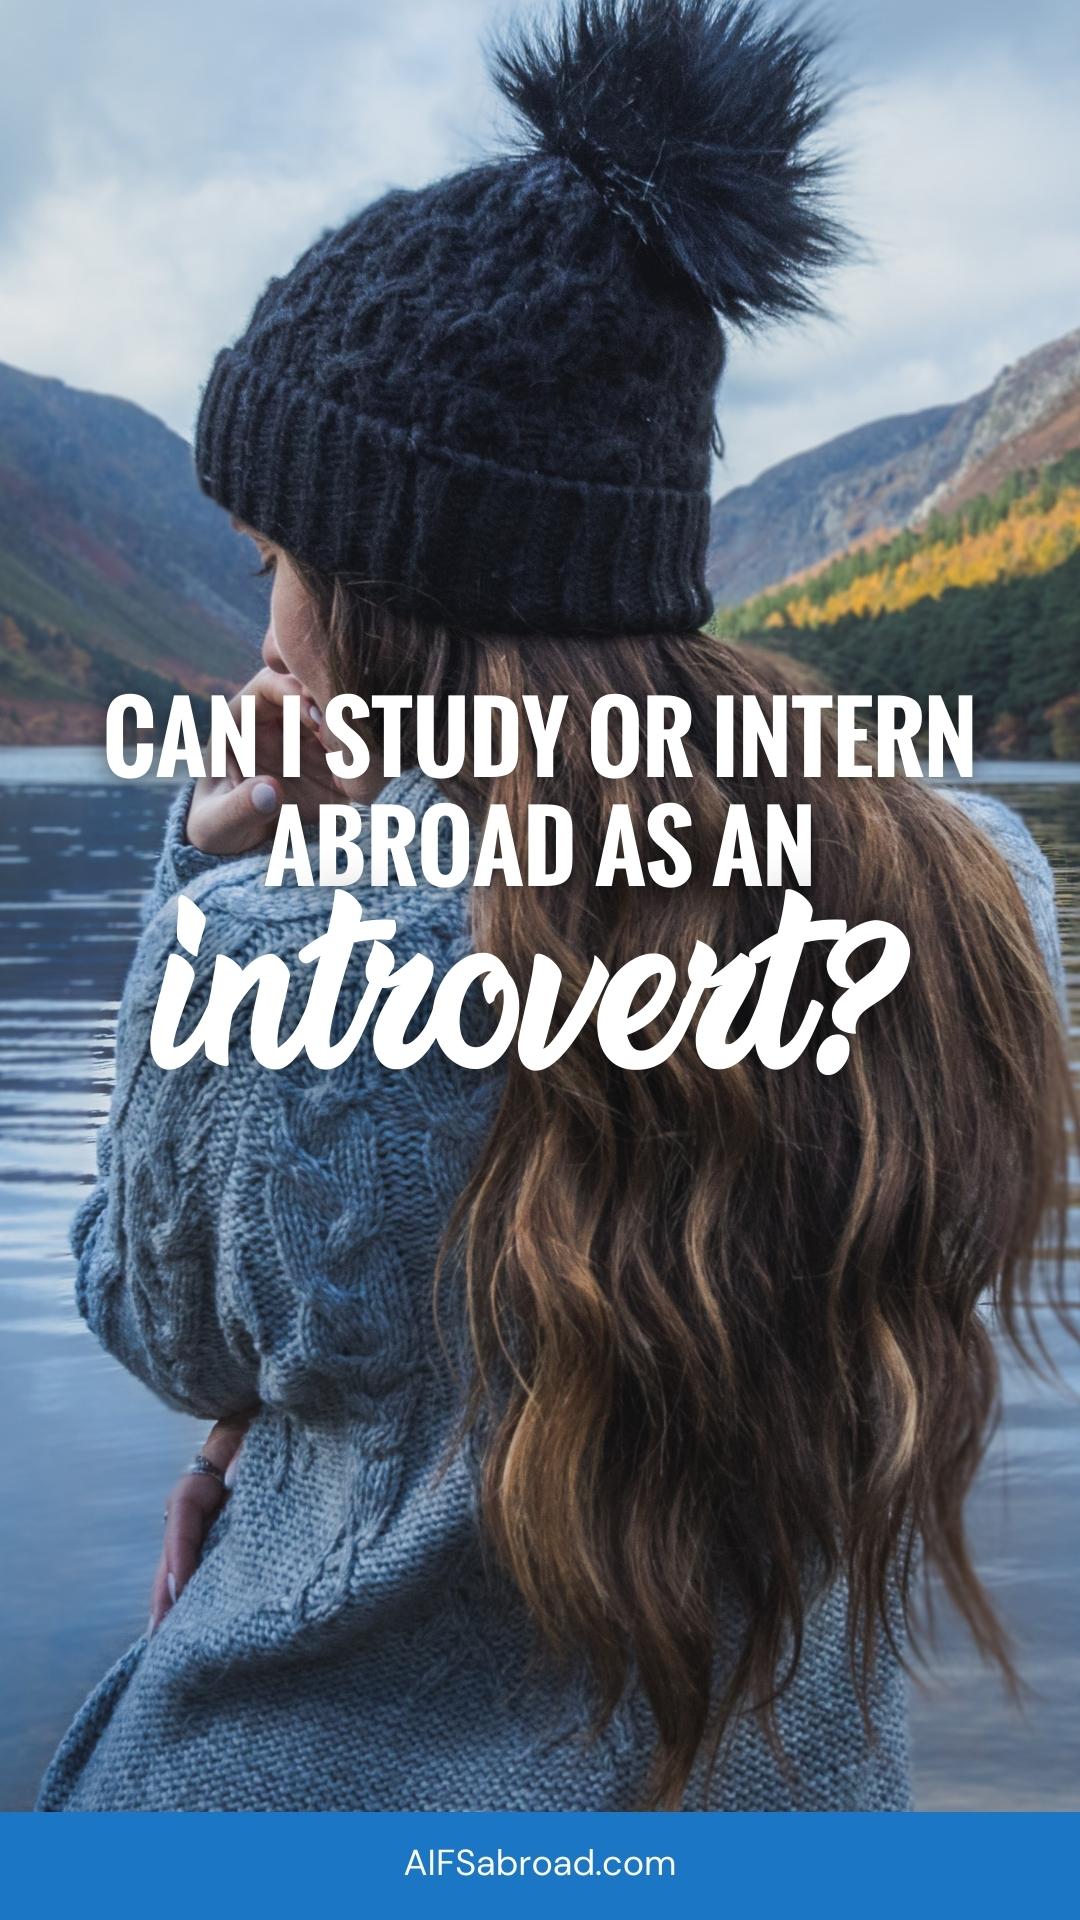 Pin image: Woman in Ireland with text overlay "Can I study or intern abroad as an introvert?" 